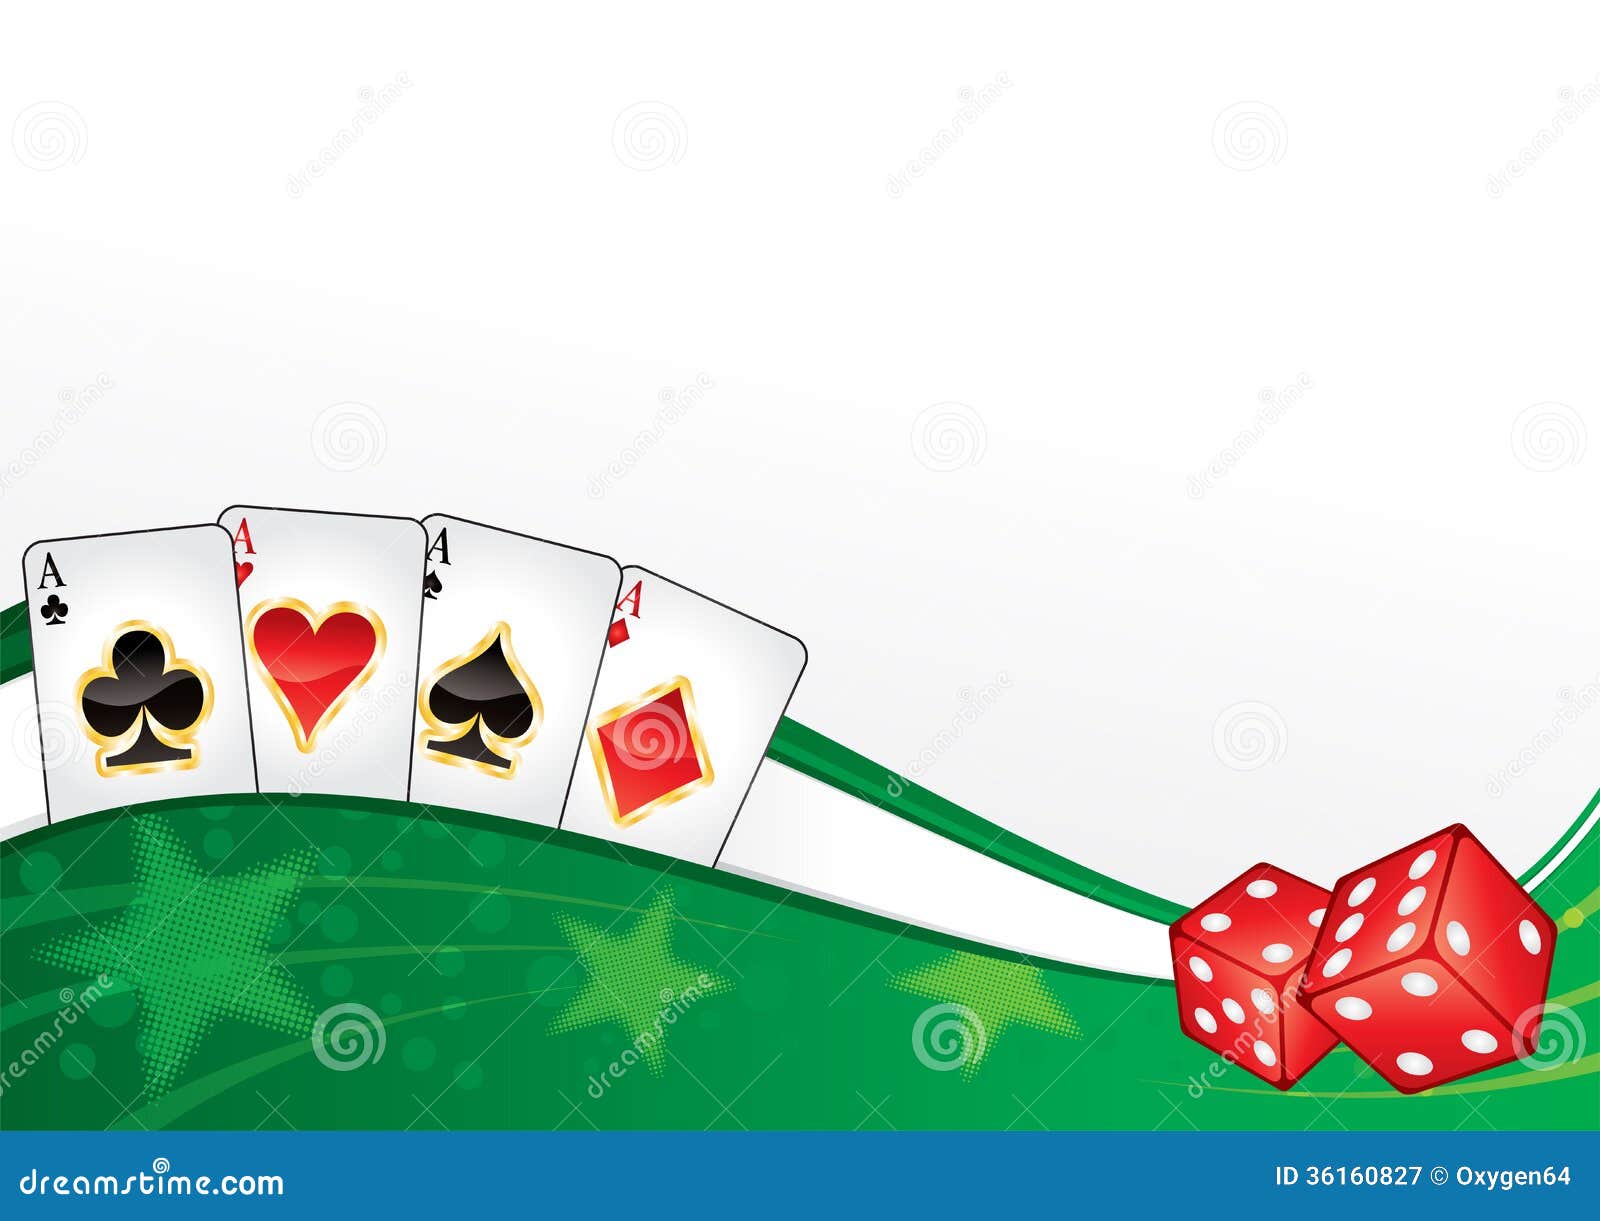 Casino background stock vector. Image of bell, stars 